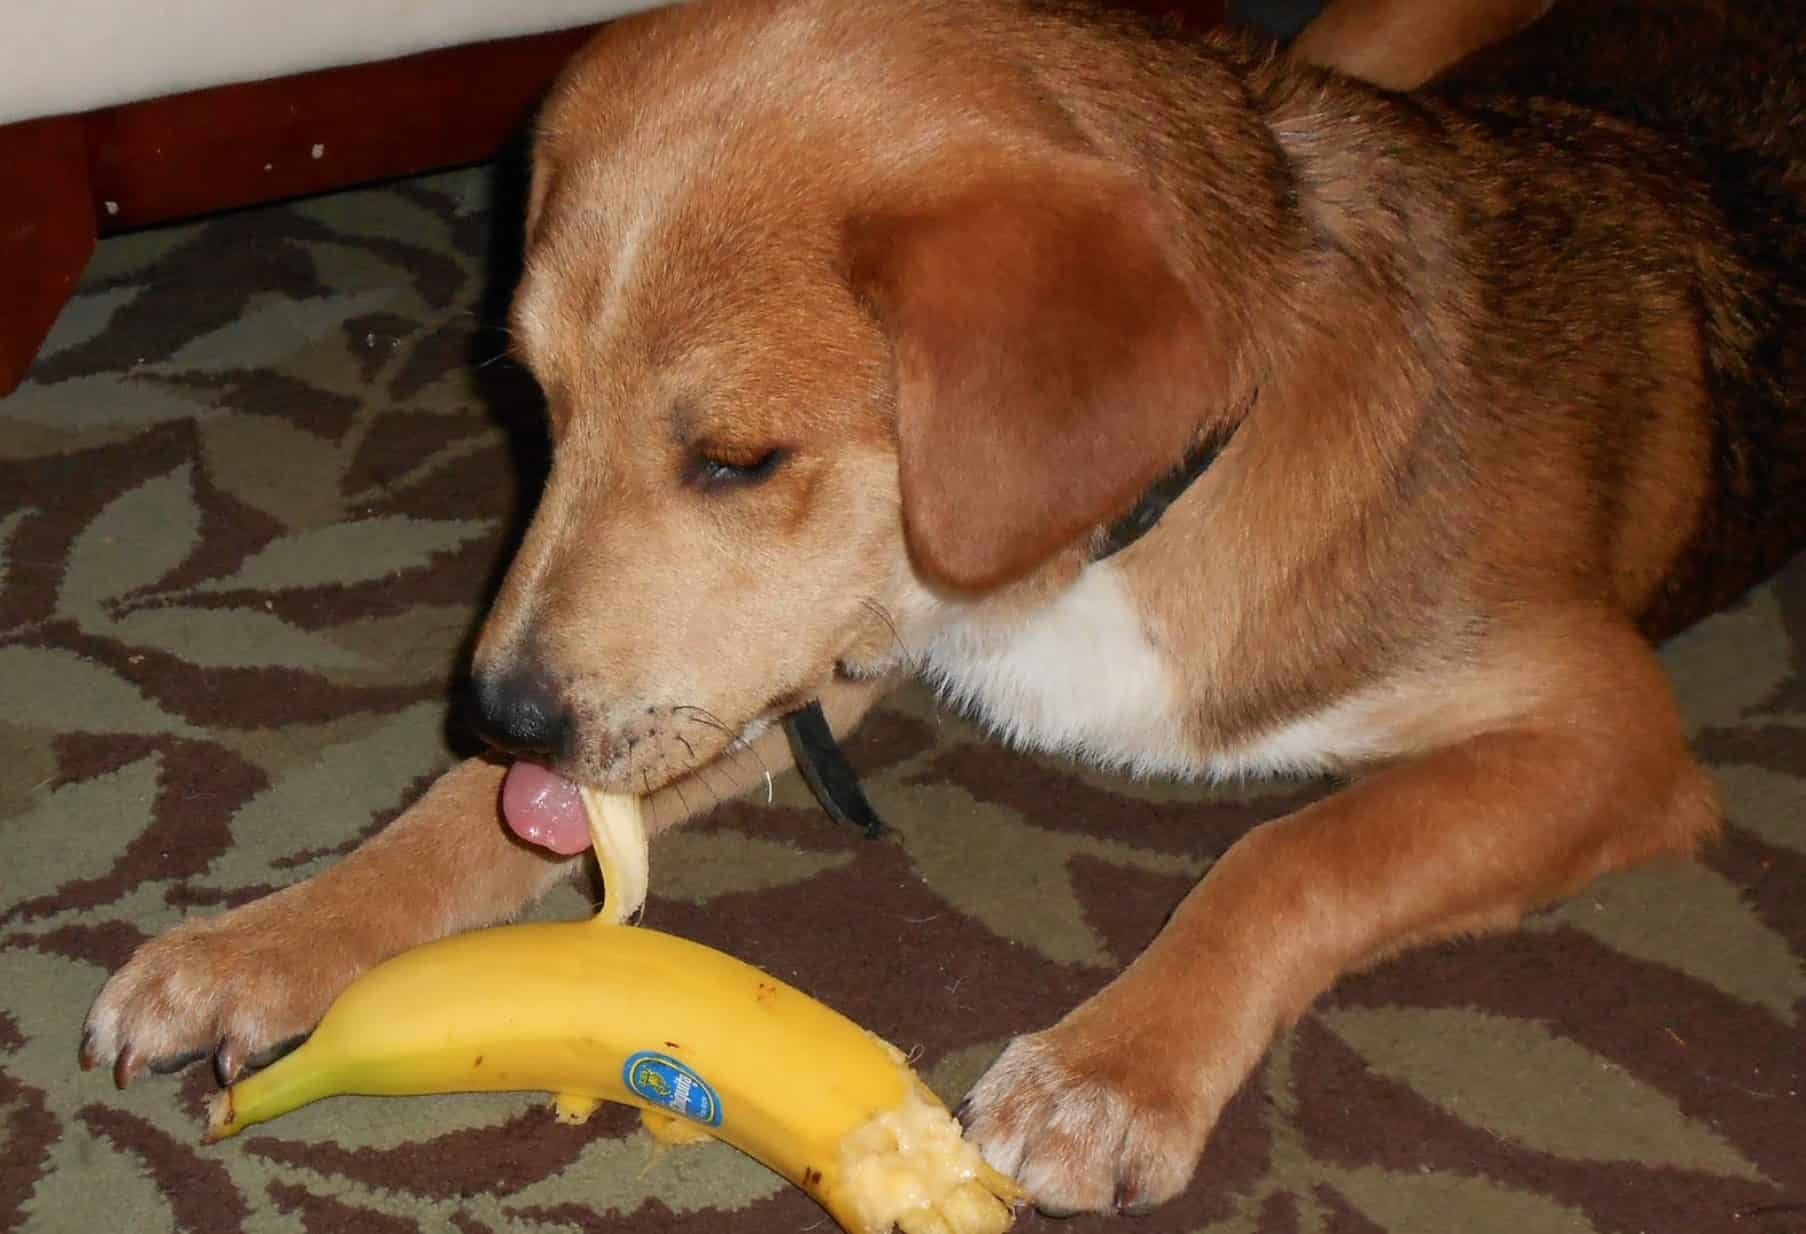 Dogs can eat bananas only when they are properly prepared.